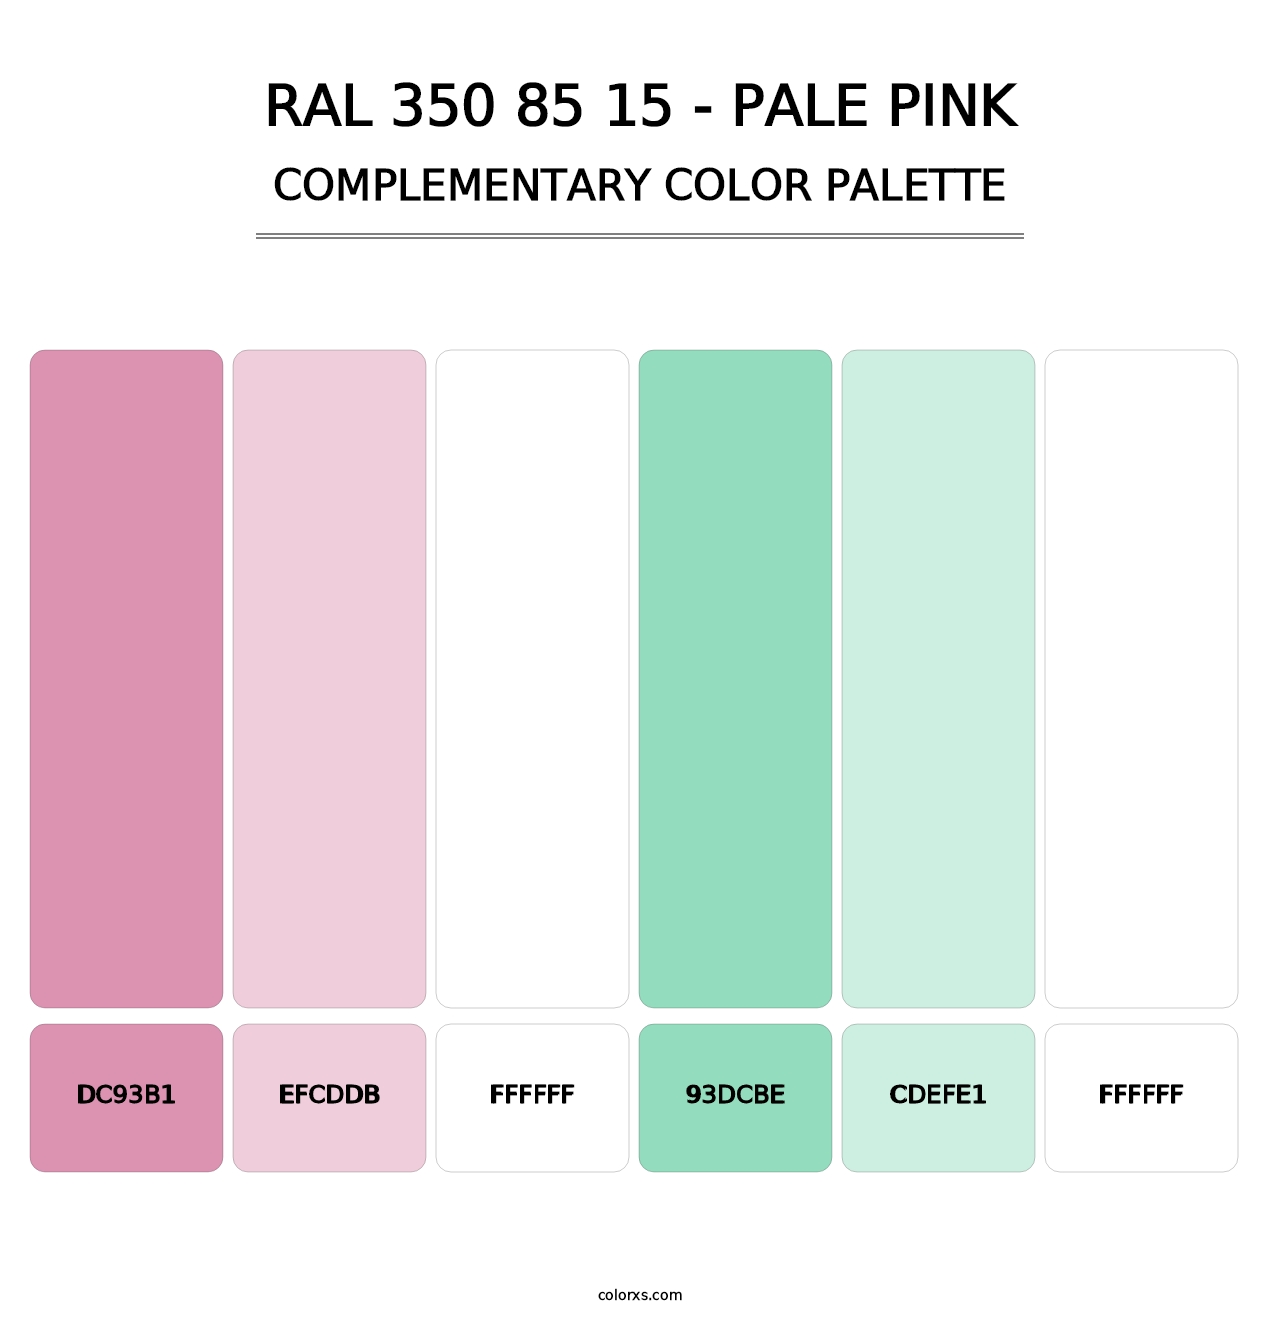 RAL 350 85 15 - Pale Pink - Complementary Color Palette